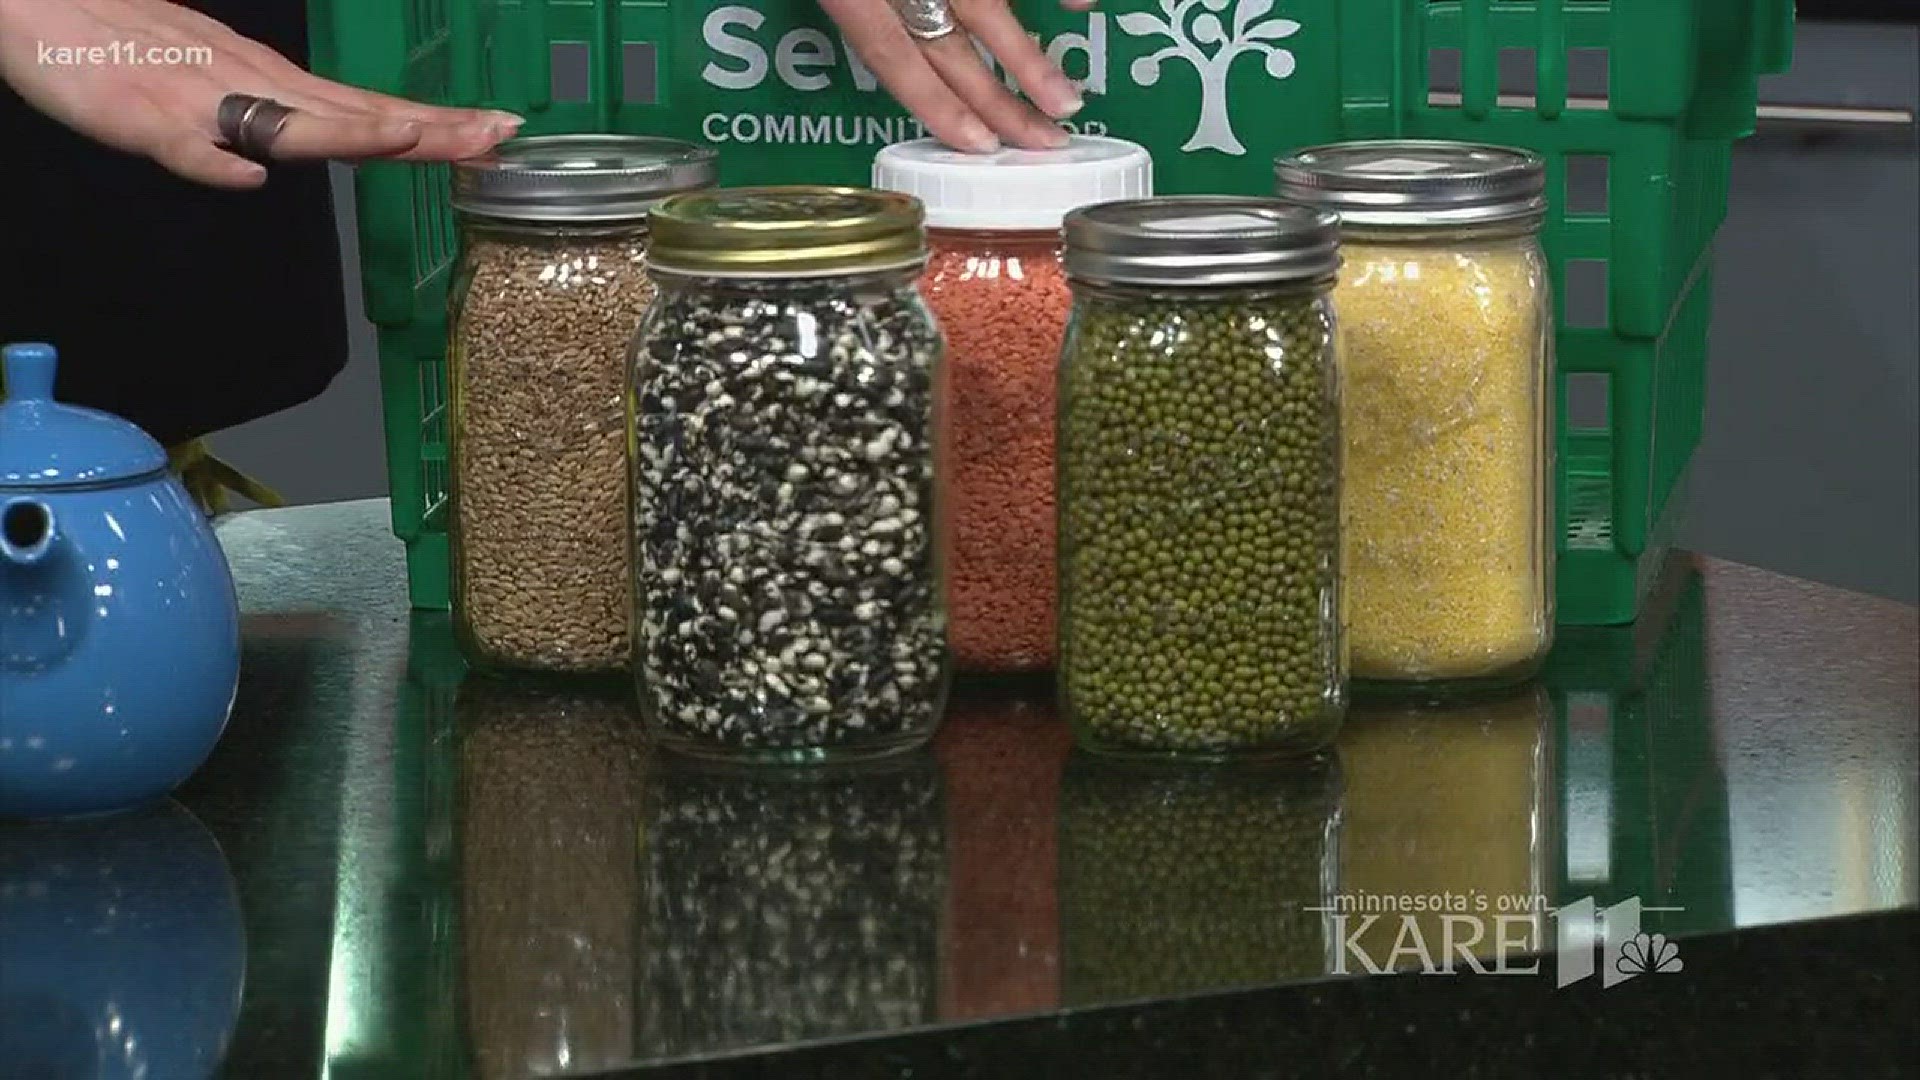 A food education expert at Seward Community Co-op was here to share tips and tricks for buying in bulk and making tasty and healthy snacks, convenient for anytime, included healthy and homemade teas. http://kare11.tv/2FXusVn